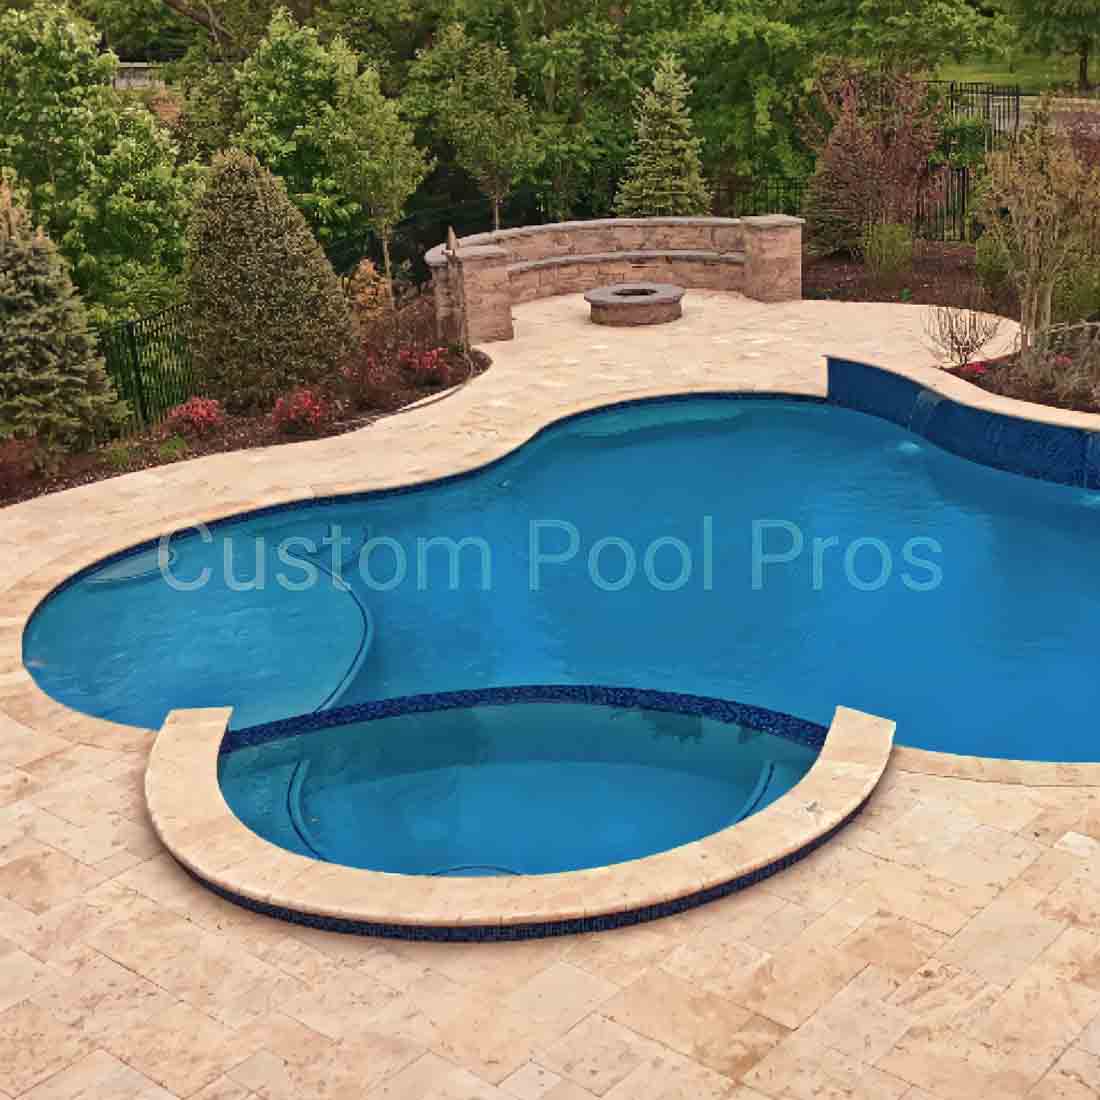 How is a Concrete Pool with Vinyl Liner made